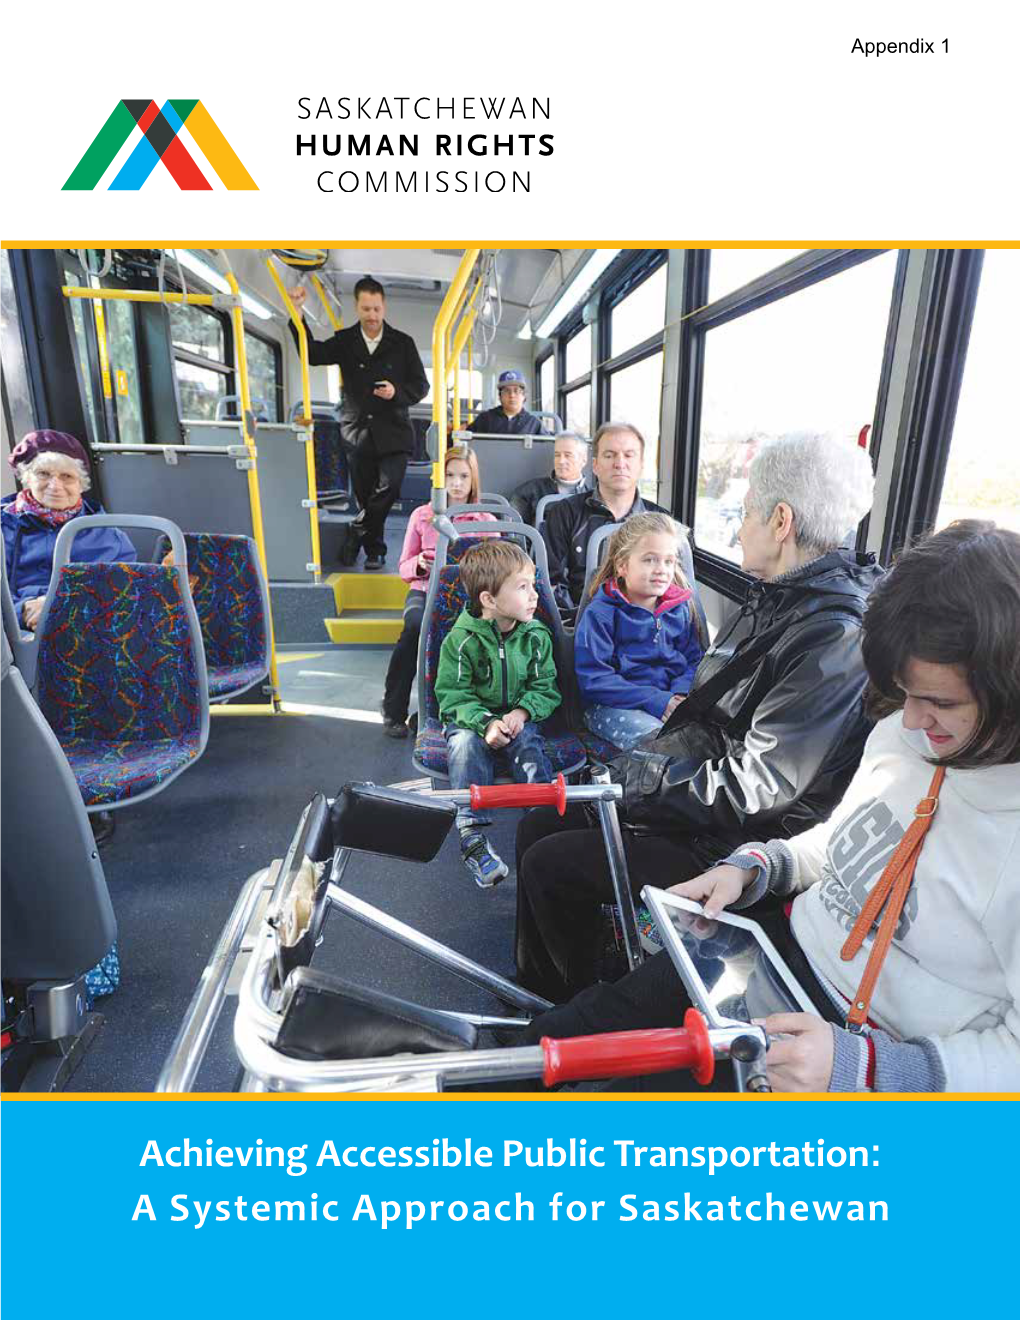 Achieving Accessible Public Transportation: a Systemic Approach for Saskatchewan Stakeholders